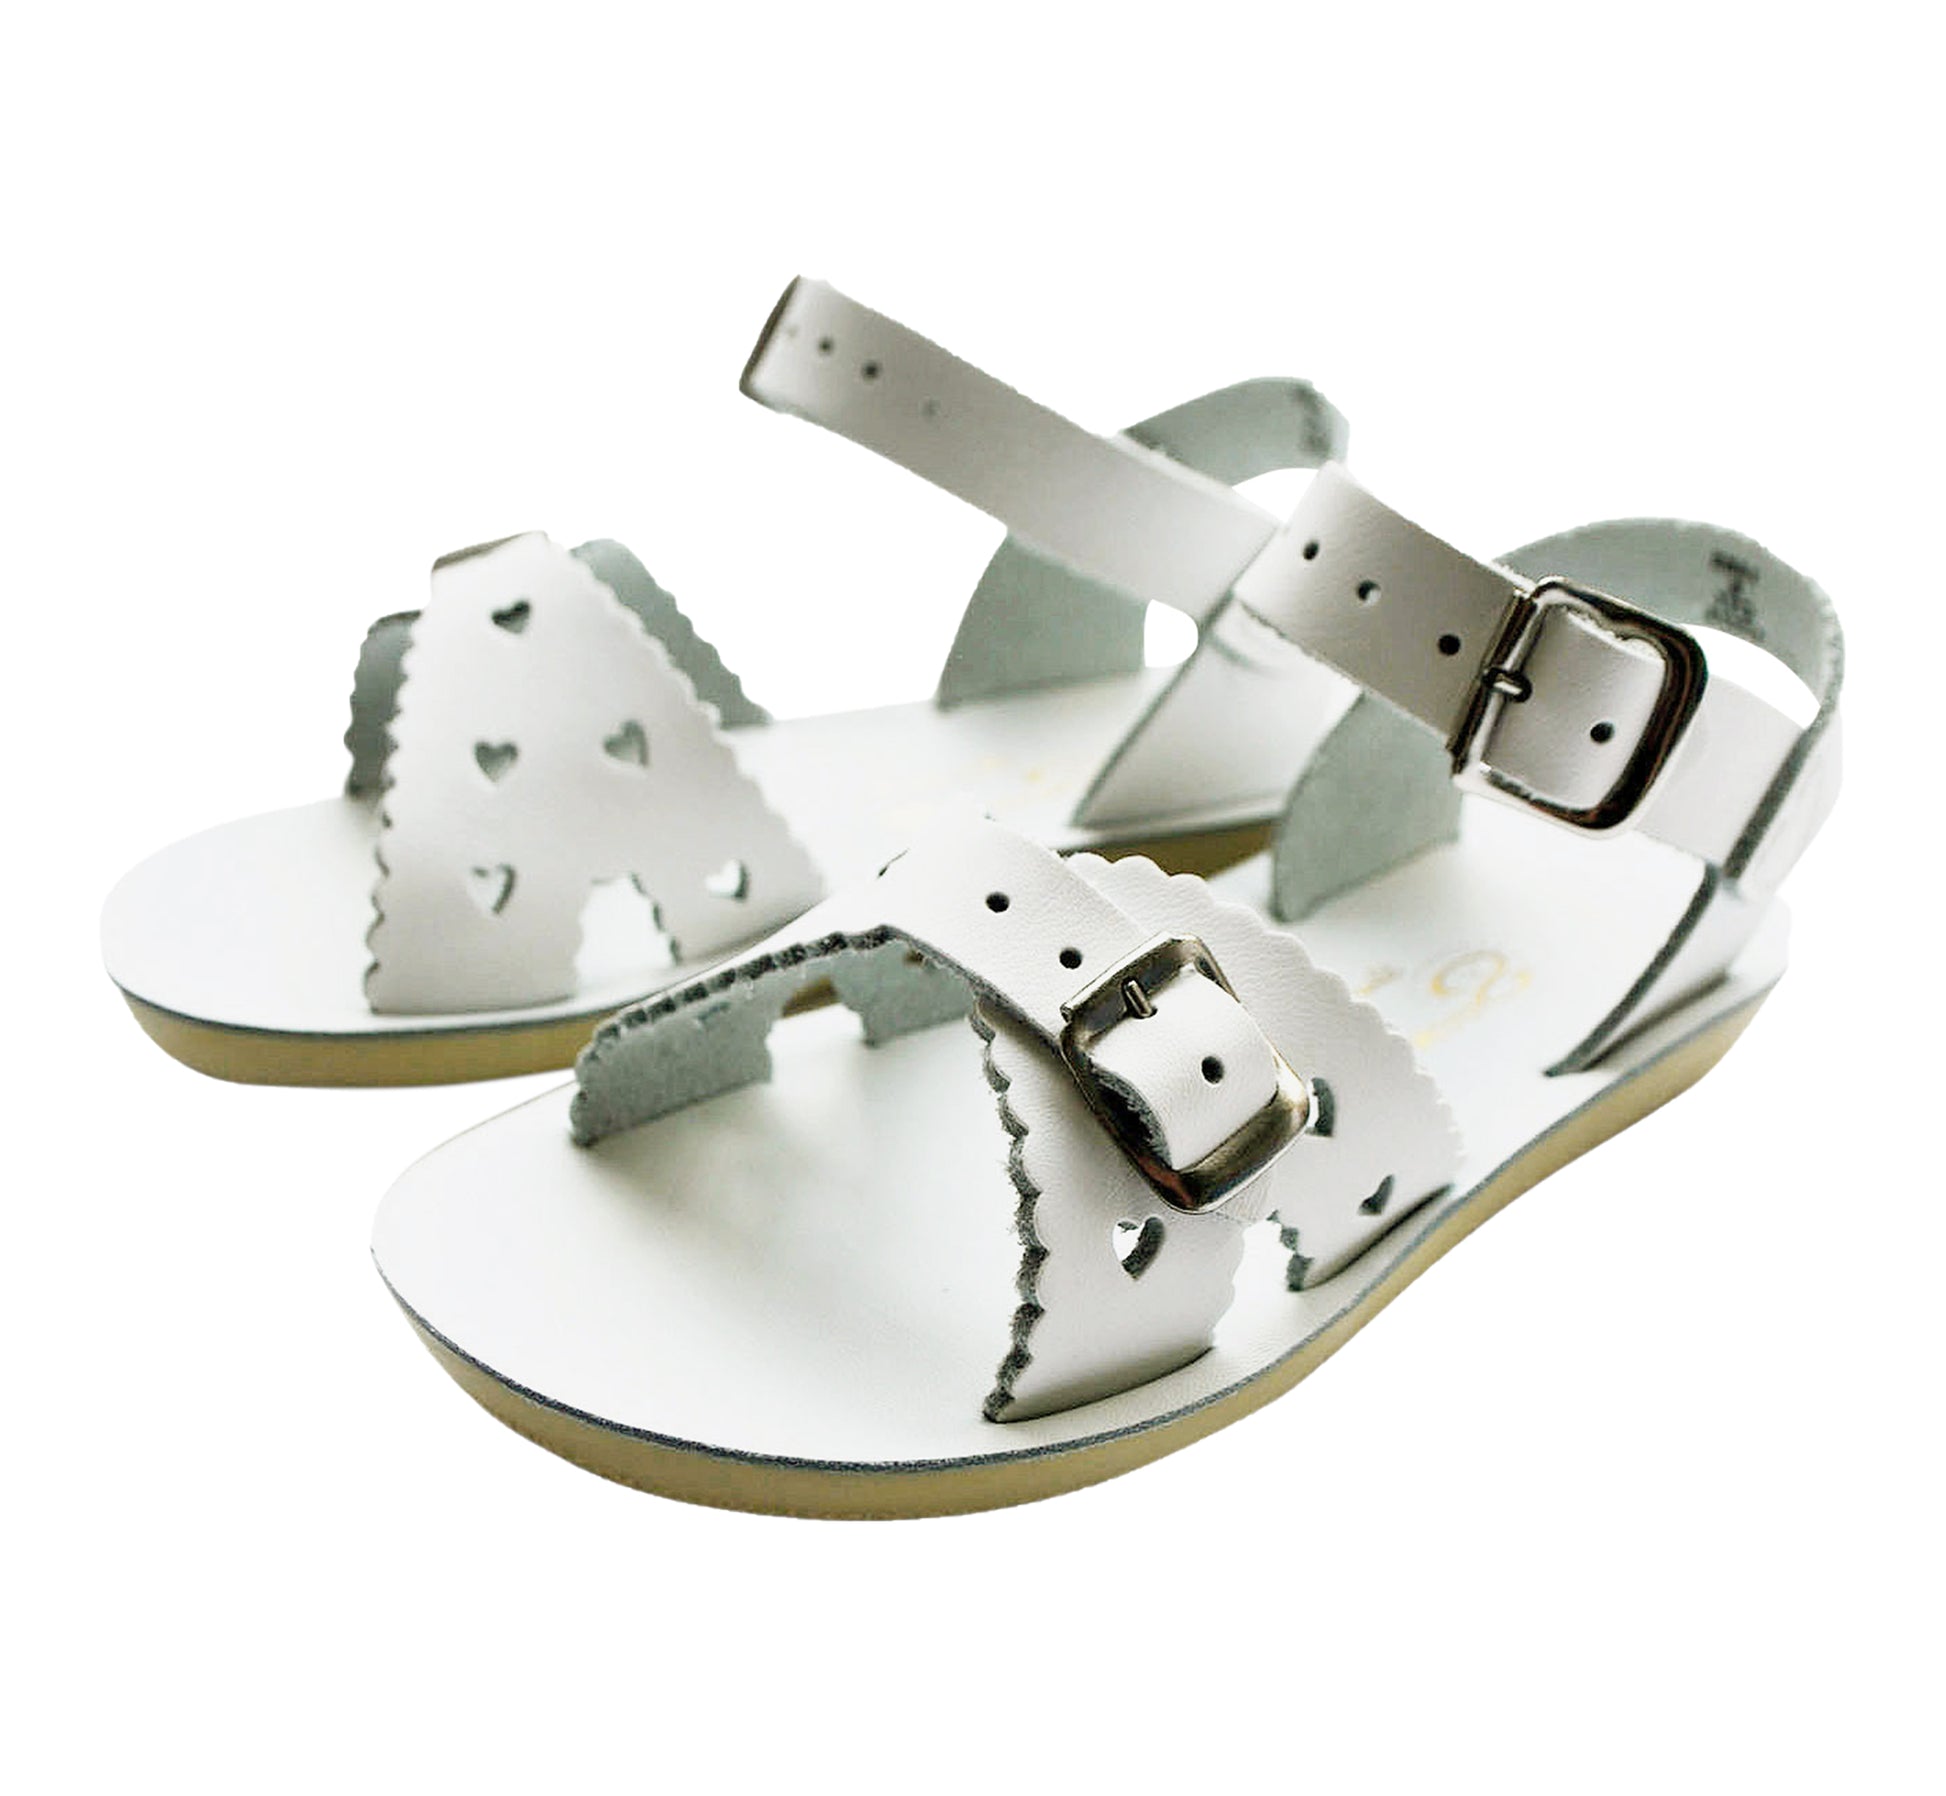 A girls sandal by Salt Water Sandal in white with double buckle fastening across the instep and around the ankle. Featuring scallop edge and punched out heart detail. Pair view.